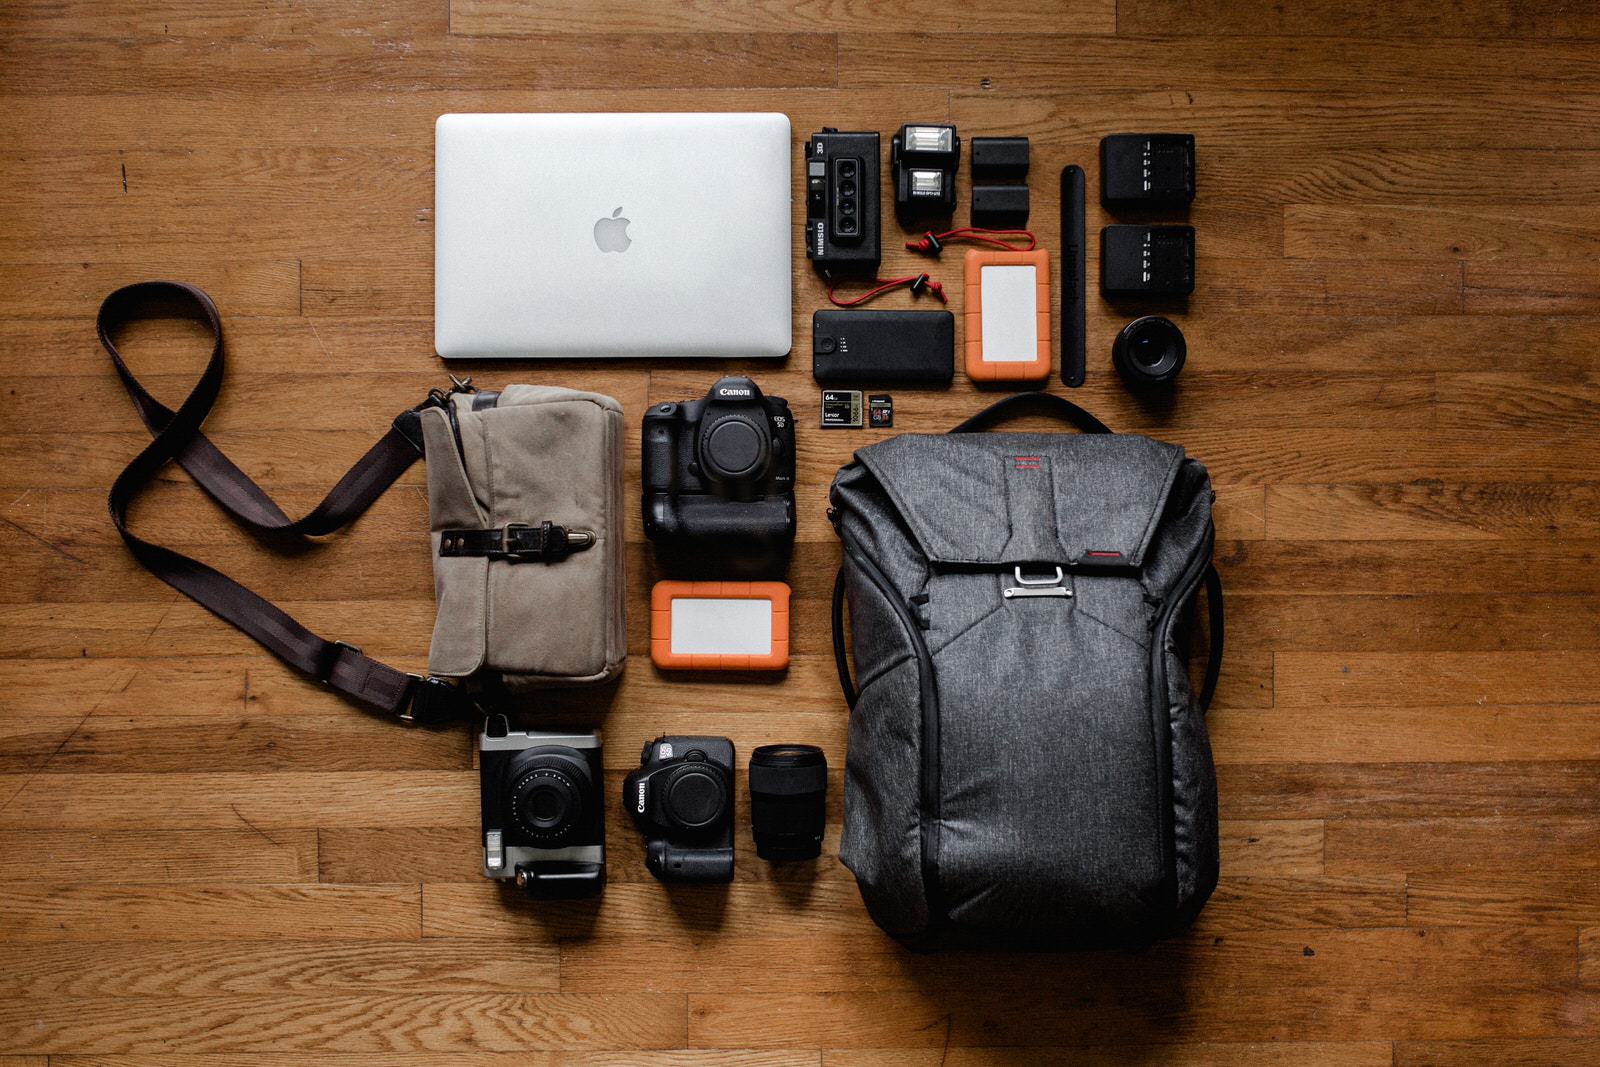 Photography business equipment including camera bag, camera lenses, hard drives, computers on a wood table